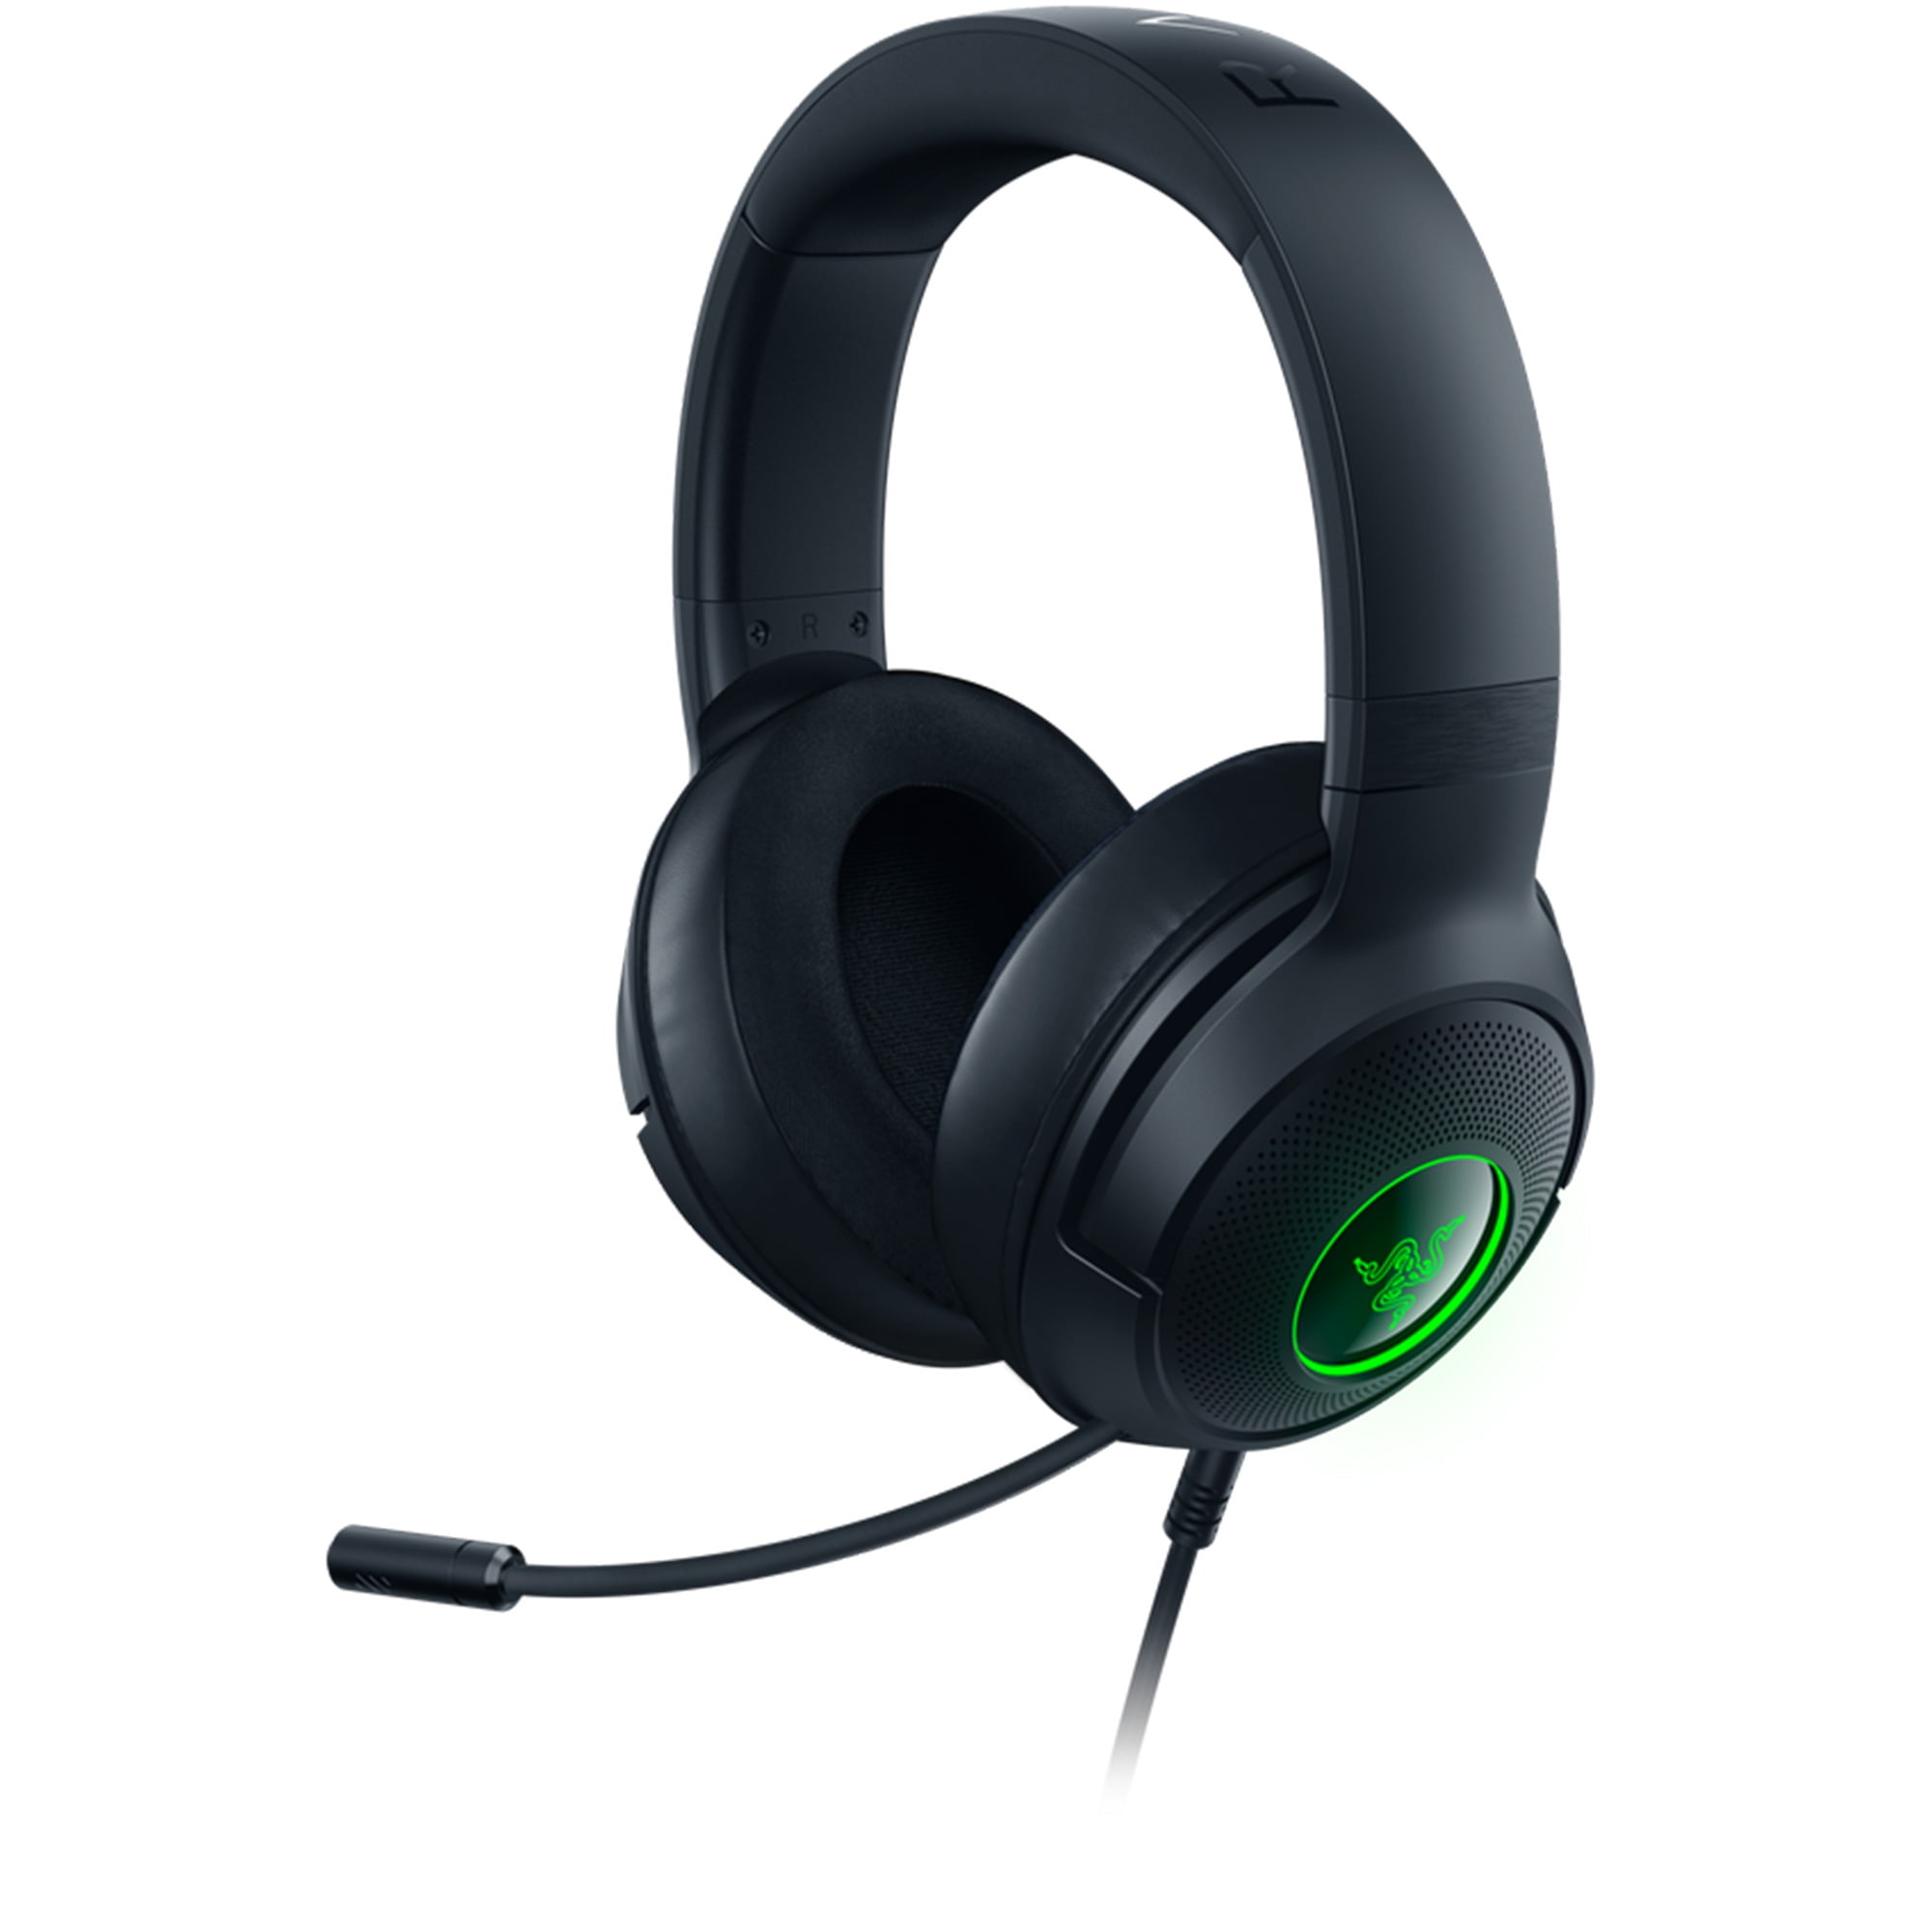 Razer Kraken V3 X Wired Lightweight Gaming Headset for PC, PS5, PS4 via USB Type A Connection, 7.1 Surround Sound, 40mm Drivers, HyperClear Bendable Cardioid Mic, Chroma RGB Lighting, Classic Black